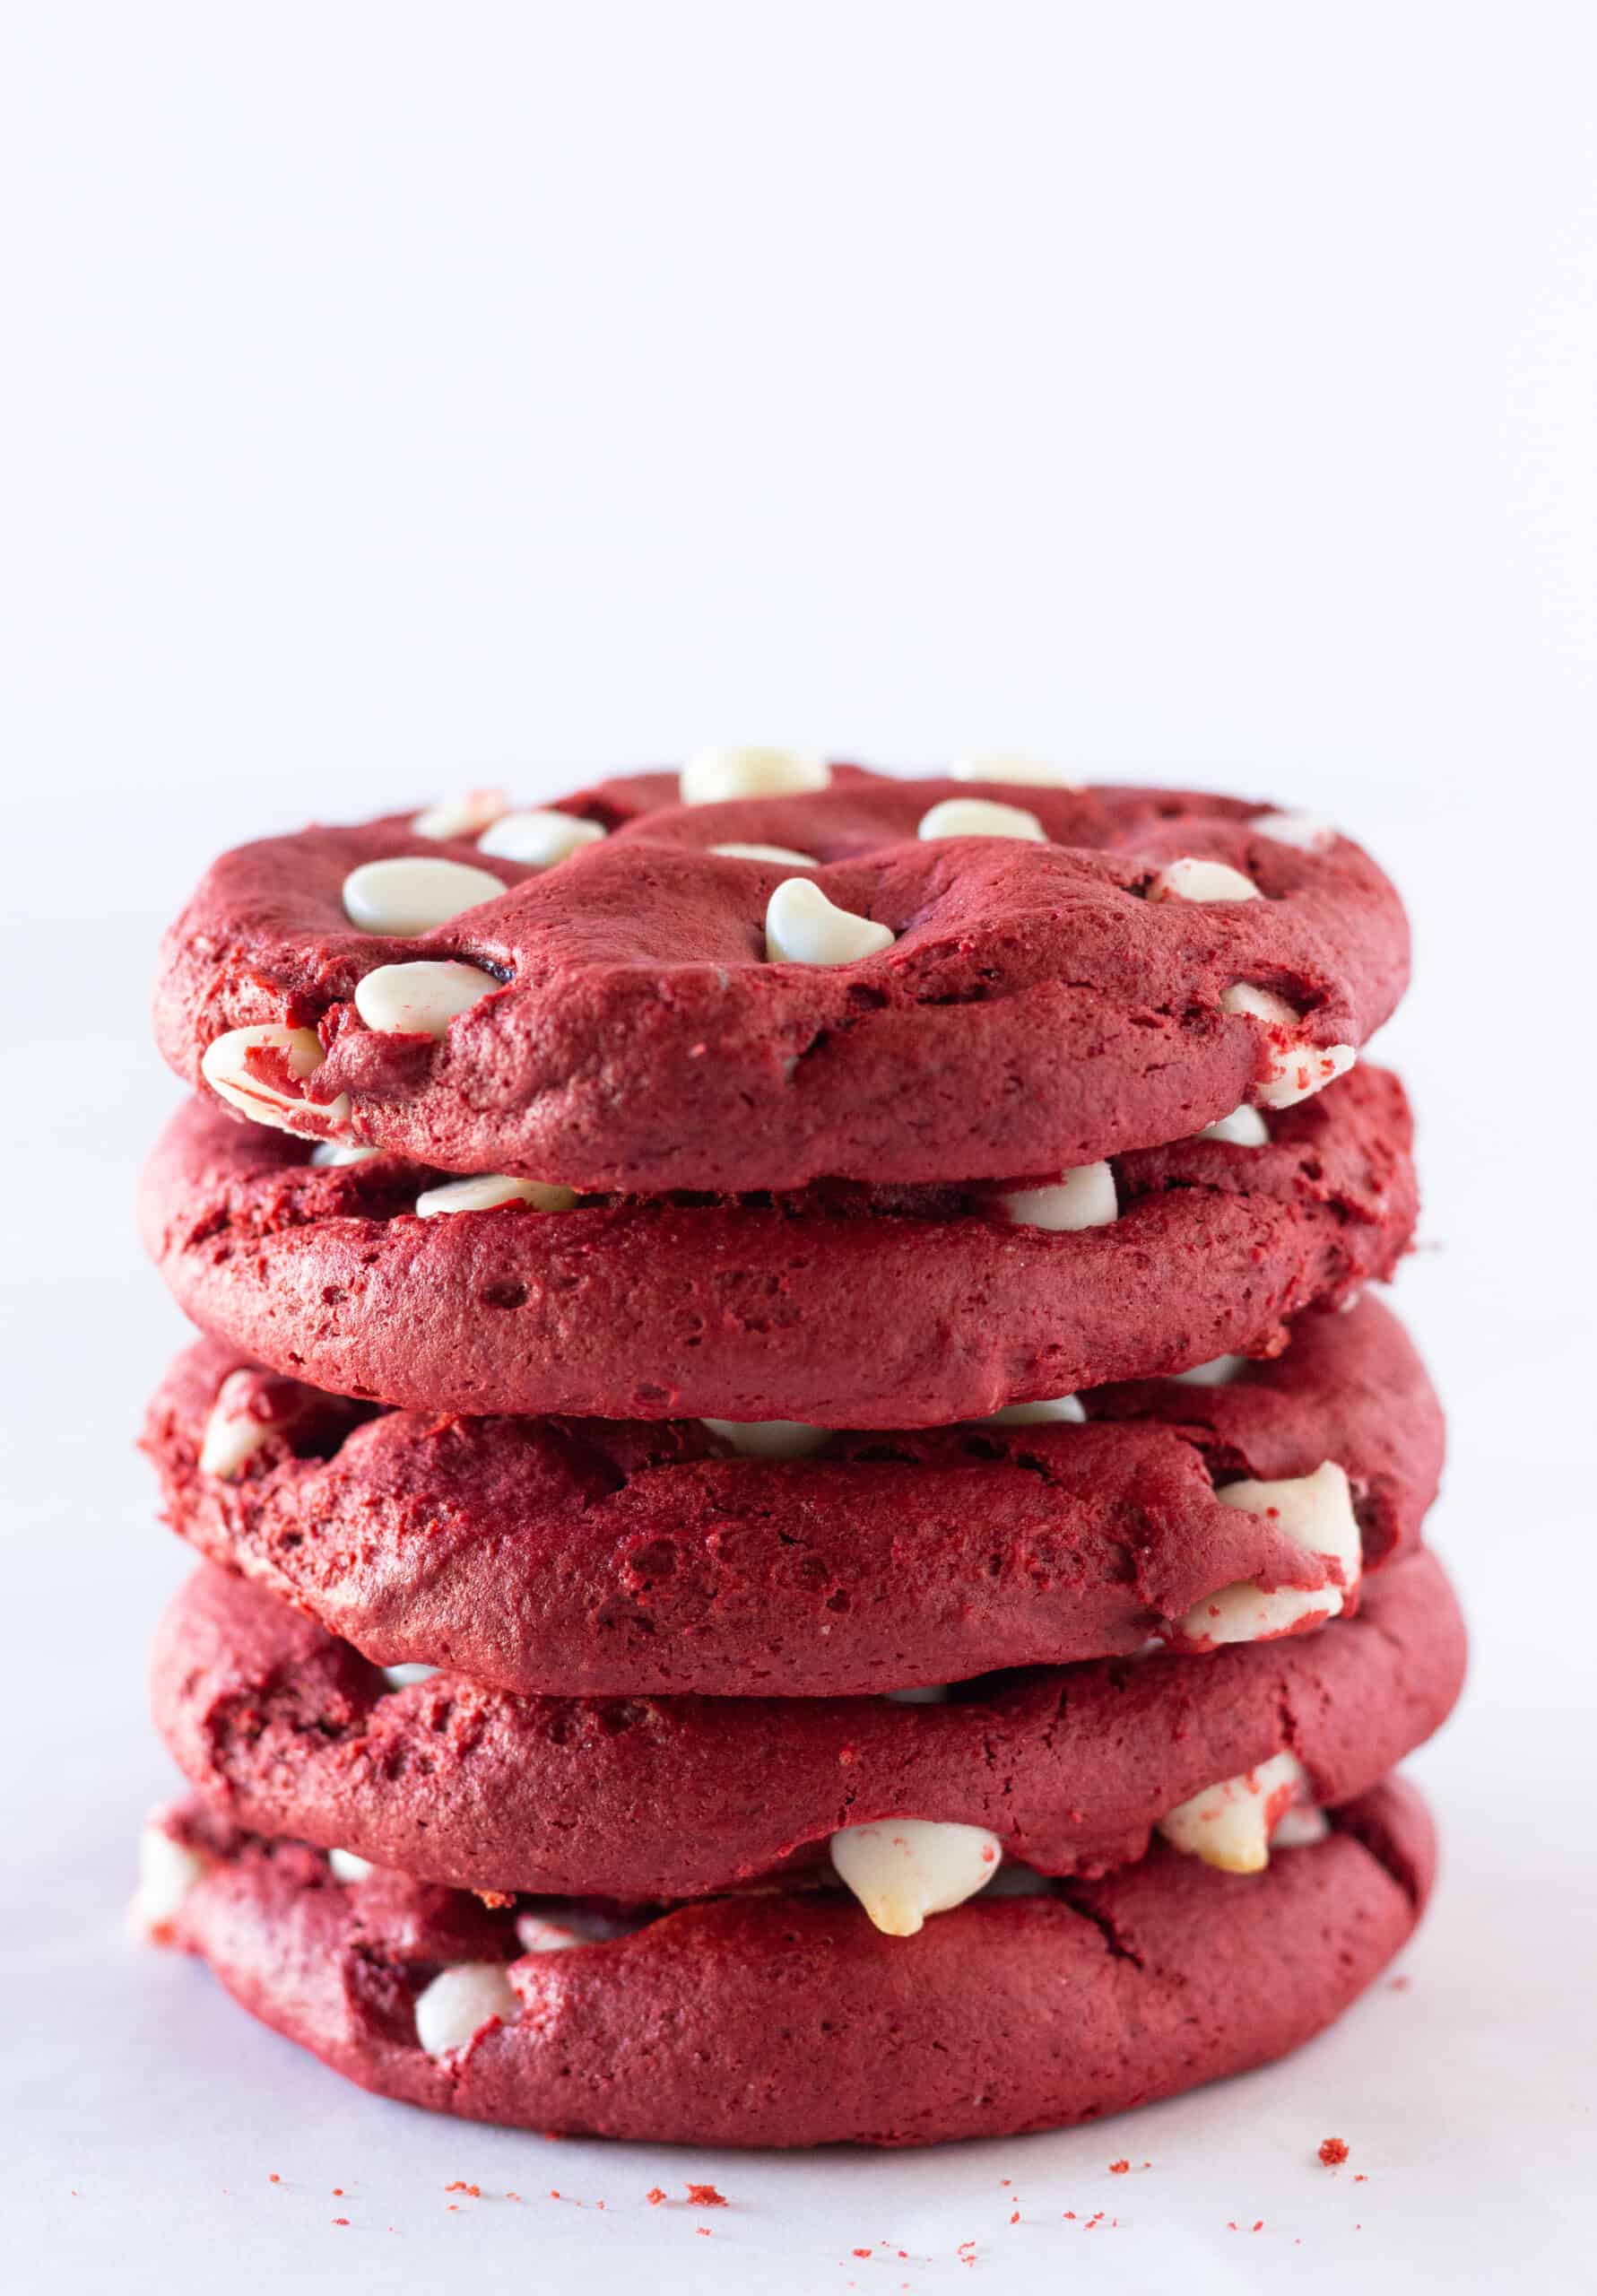 A stack of 5 red velvet and white chocolate cake mix cookies.